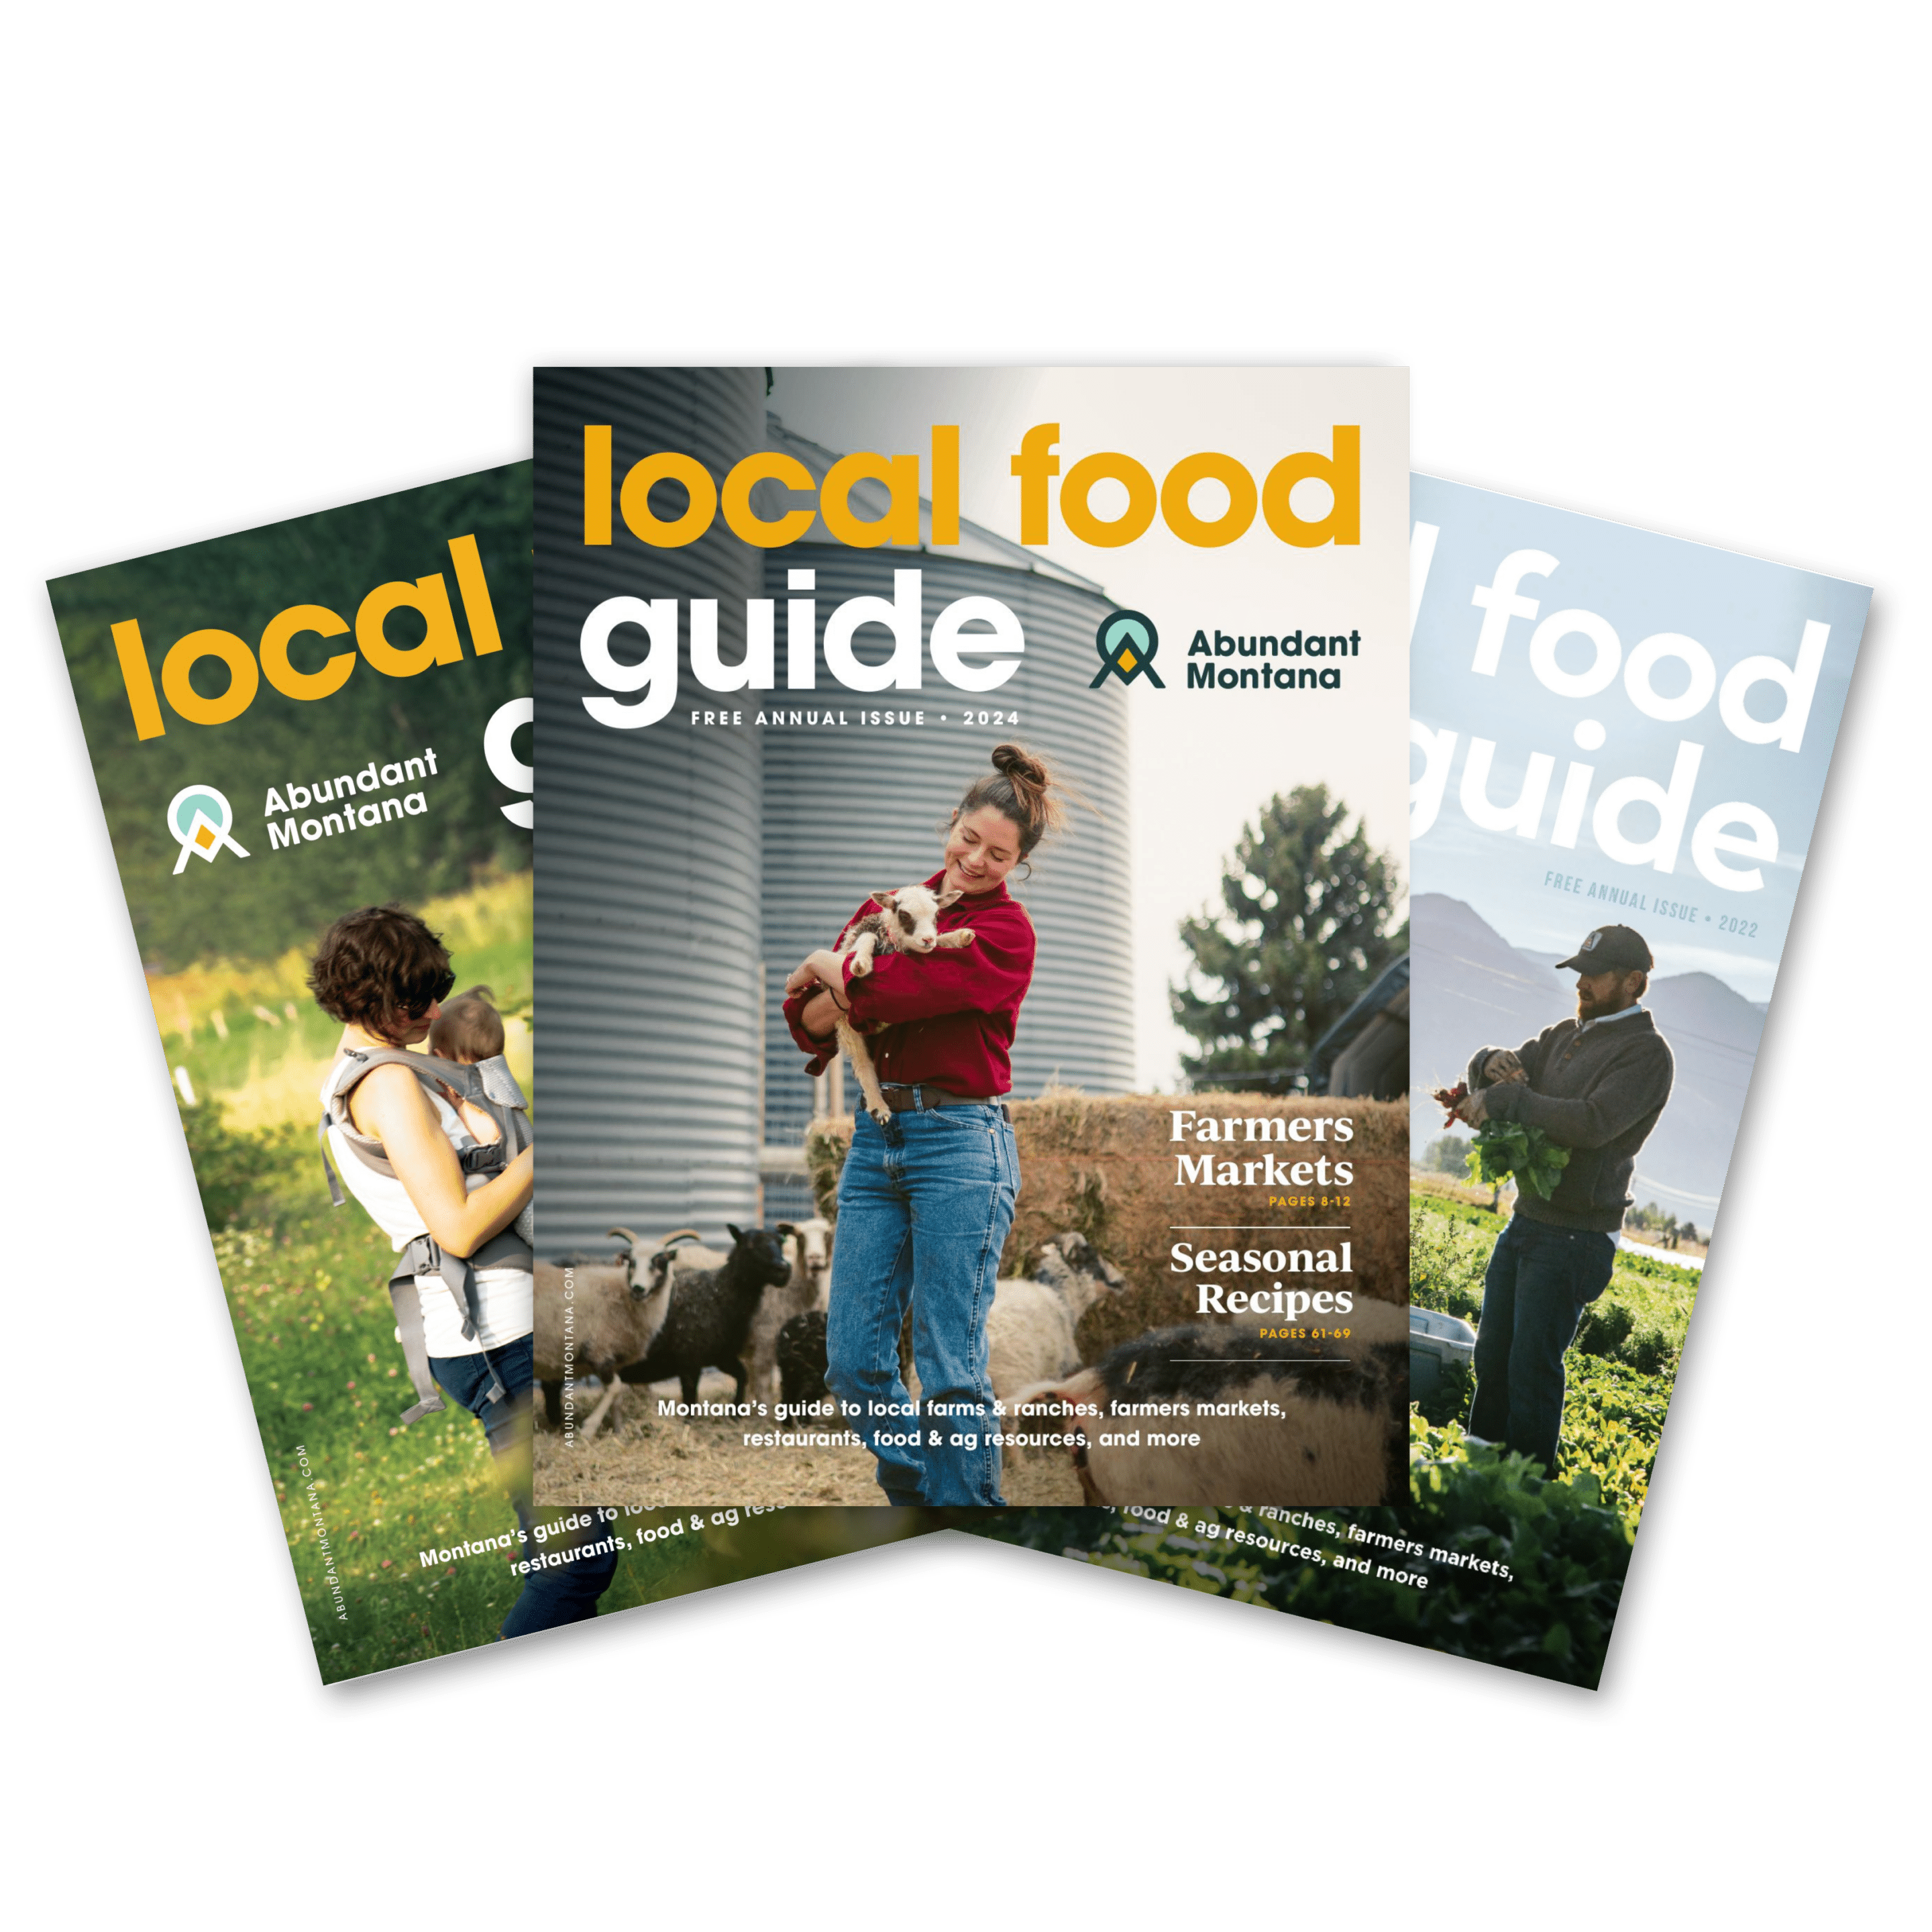 three years of Local Food Guides fanned out